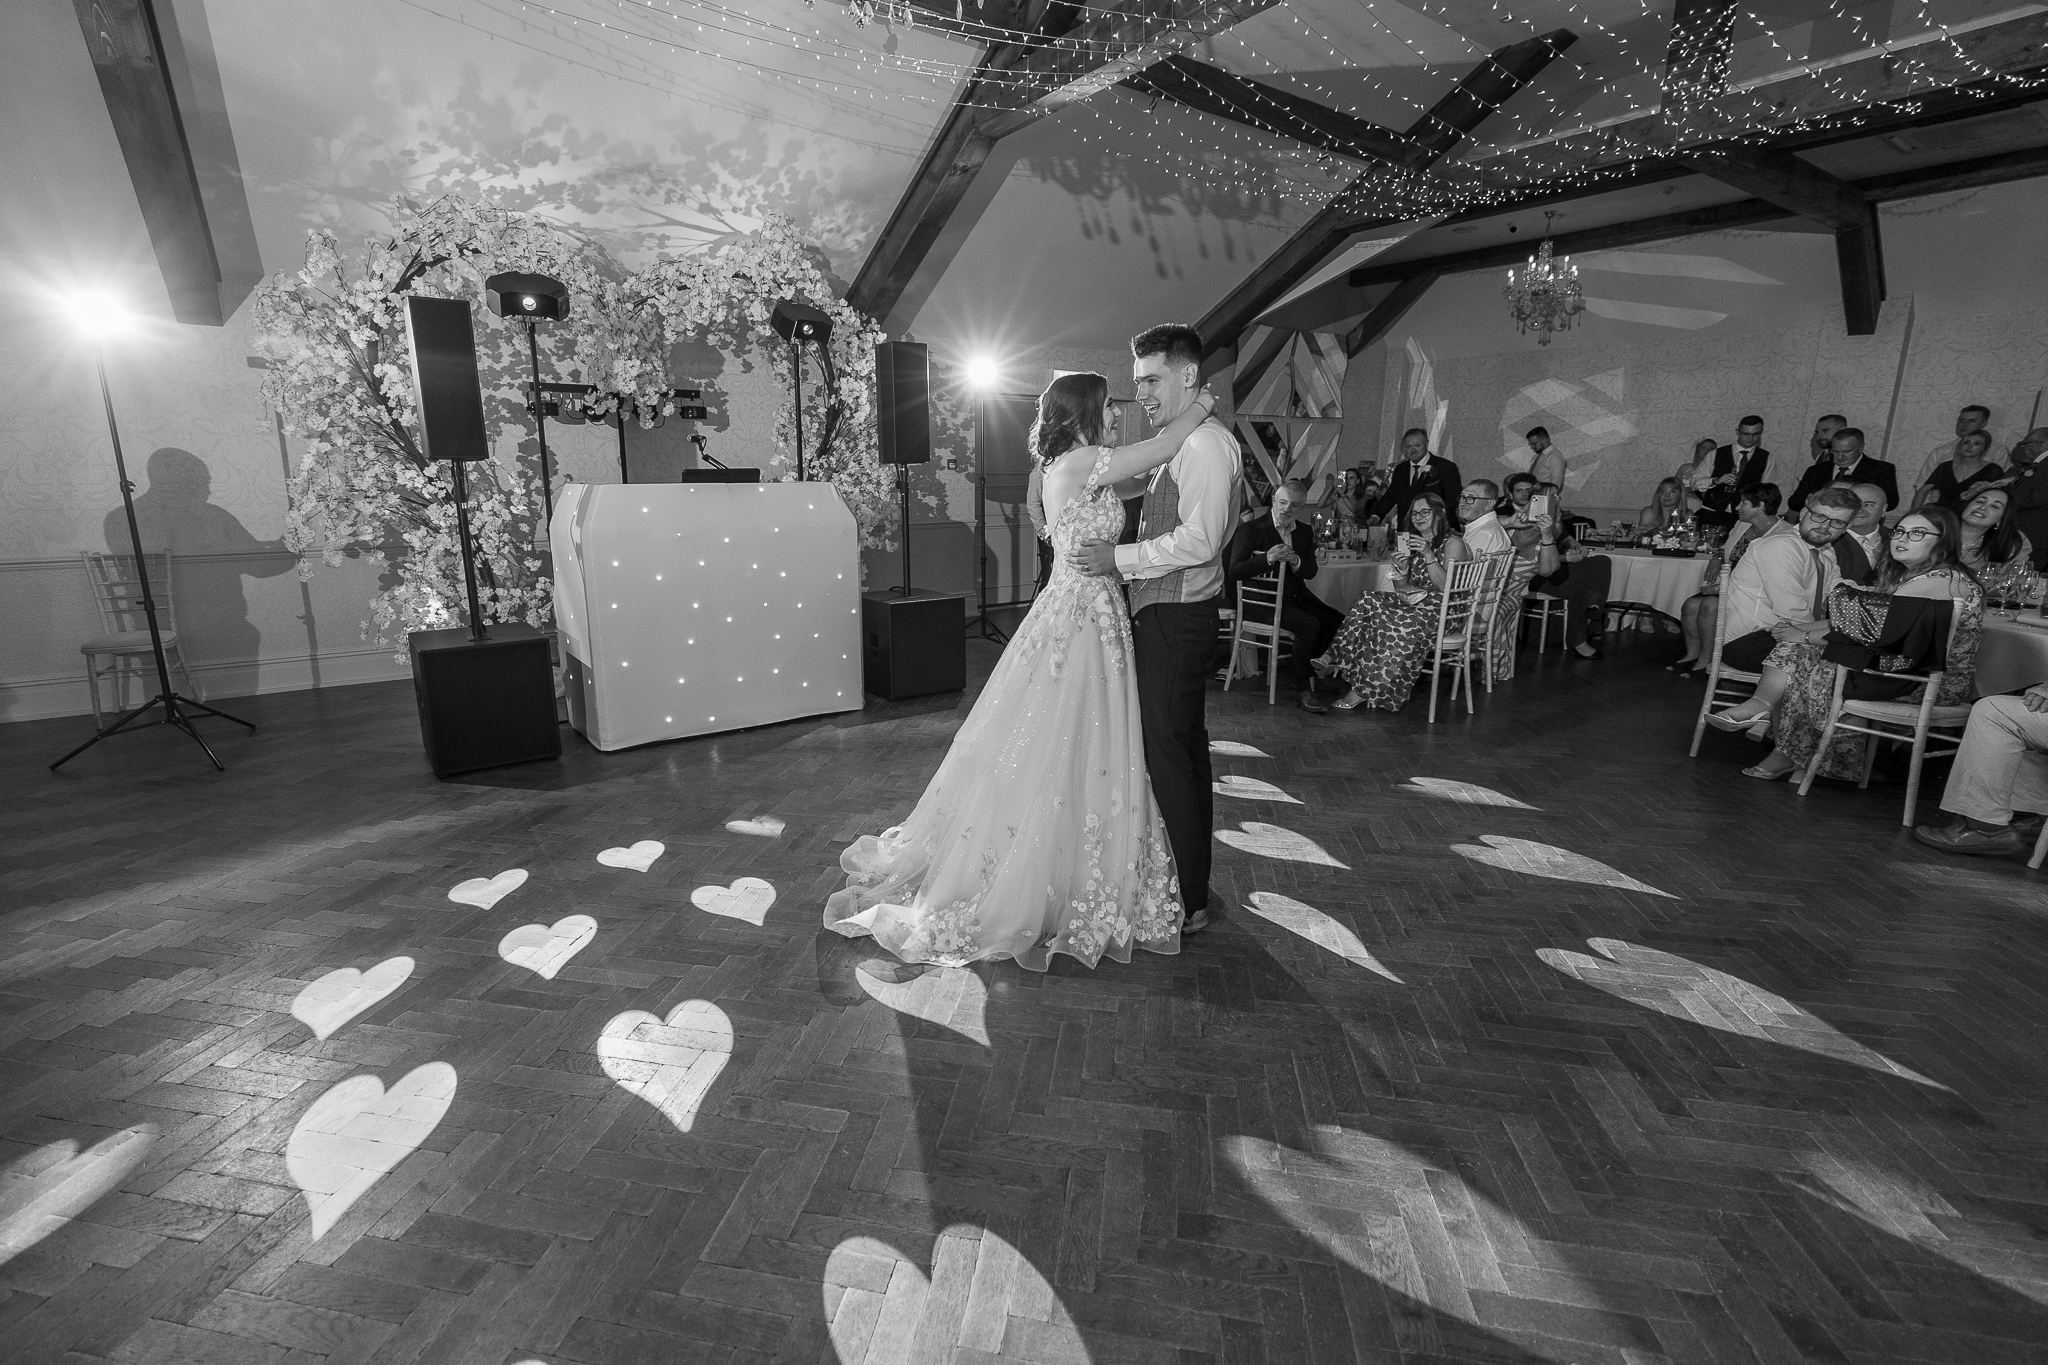 A bride and groom sharing their first dance at a wedding.